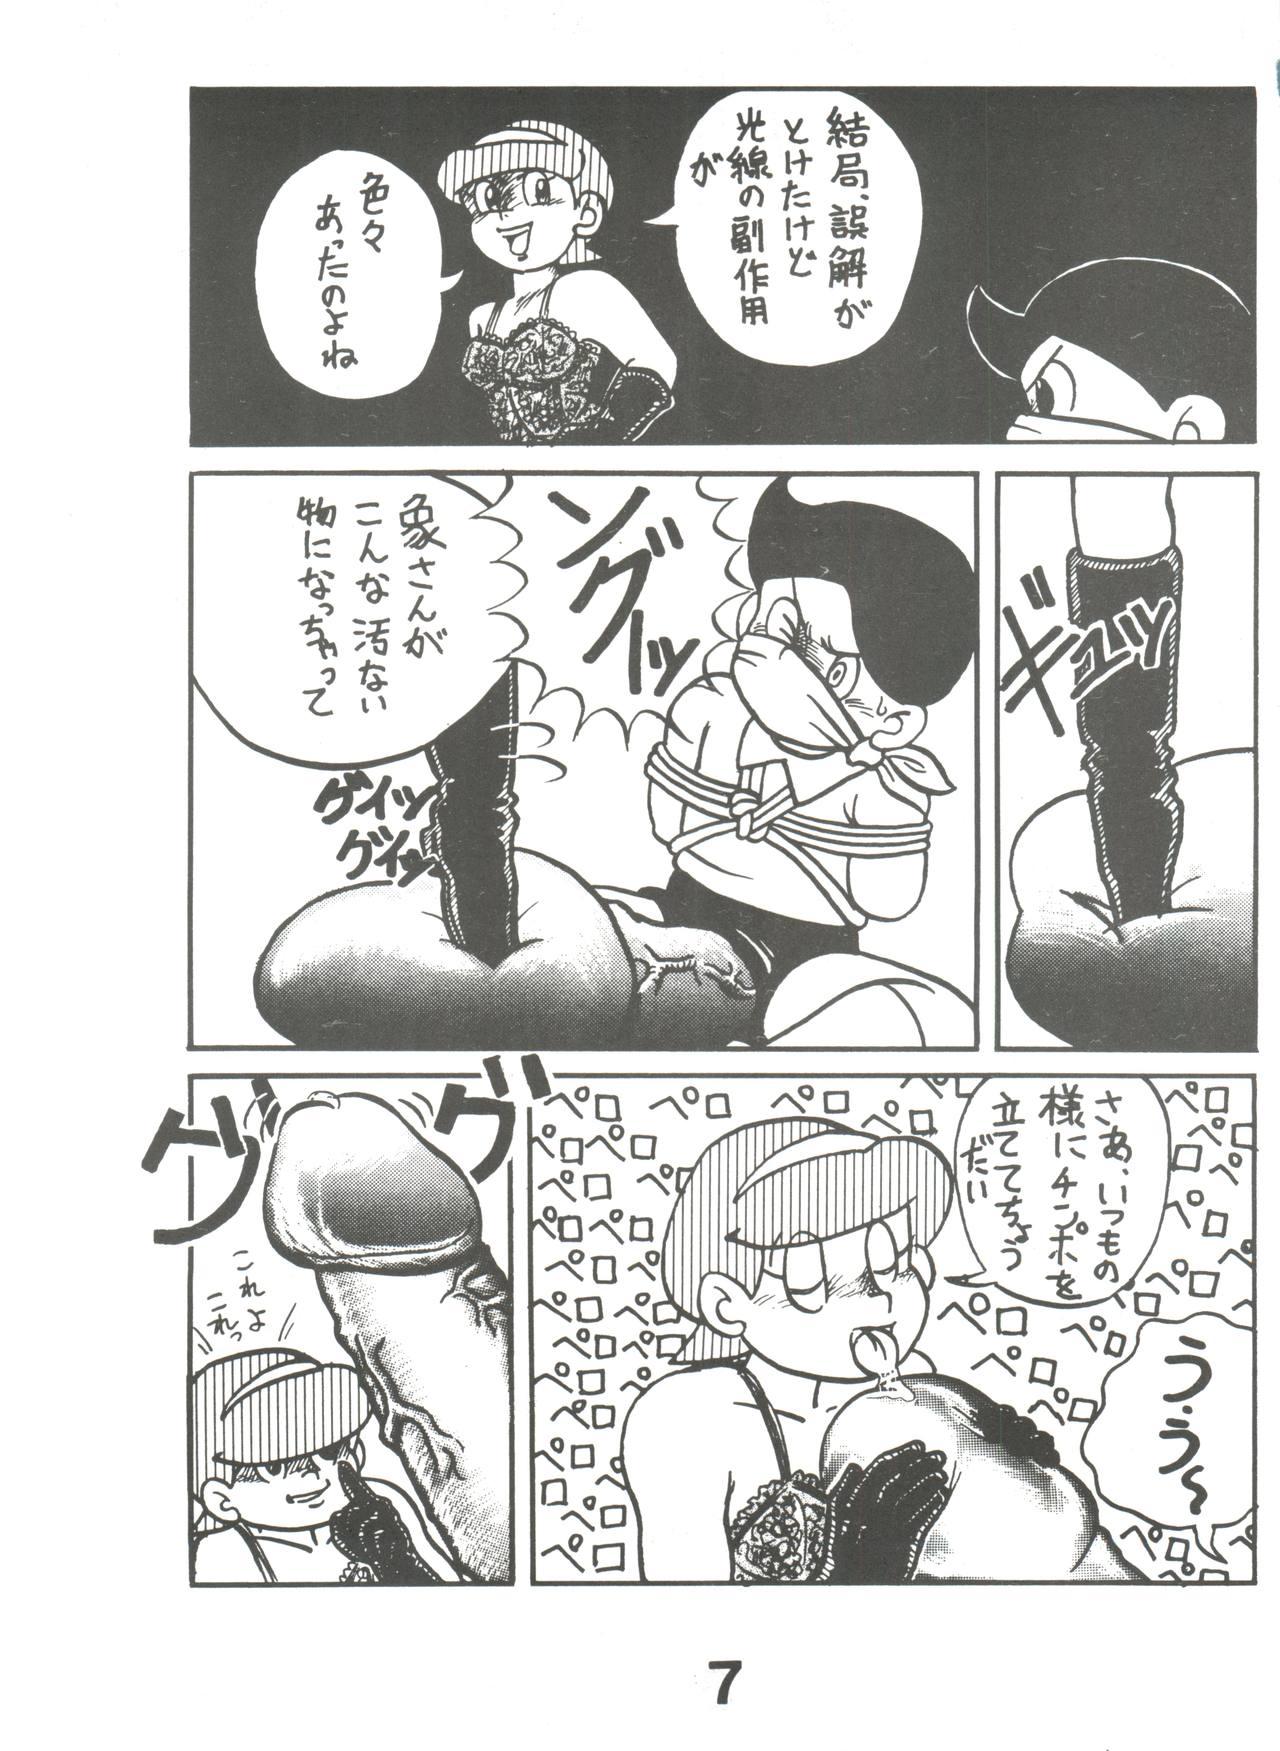 Public Nudity Sumire Special 2 - Perman Lesbians - Page 6